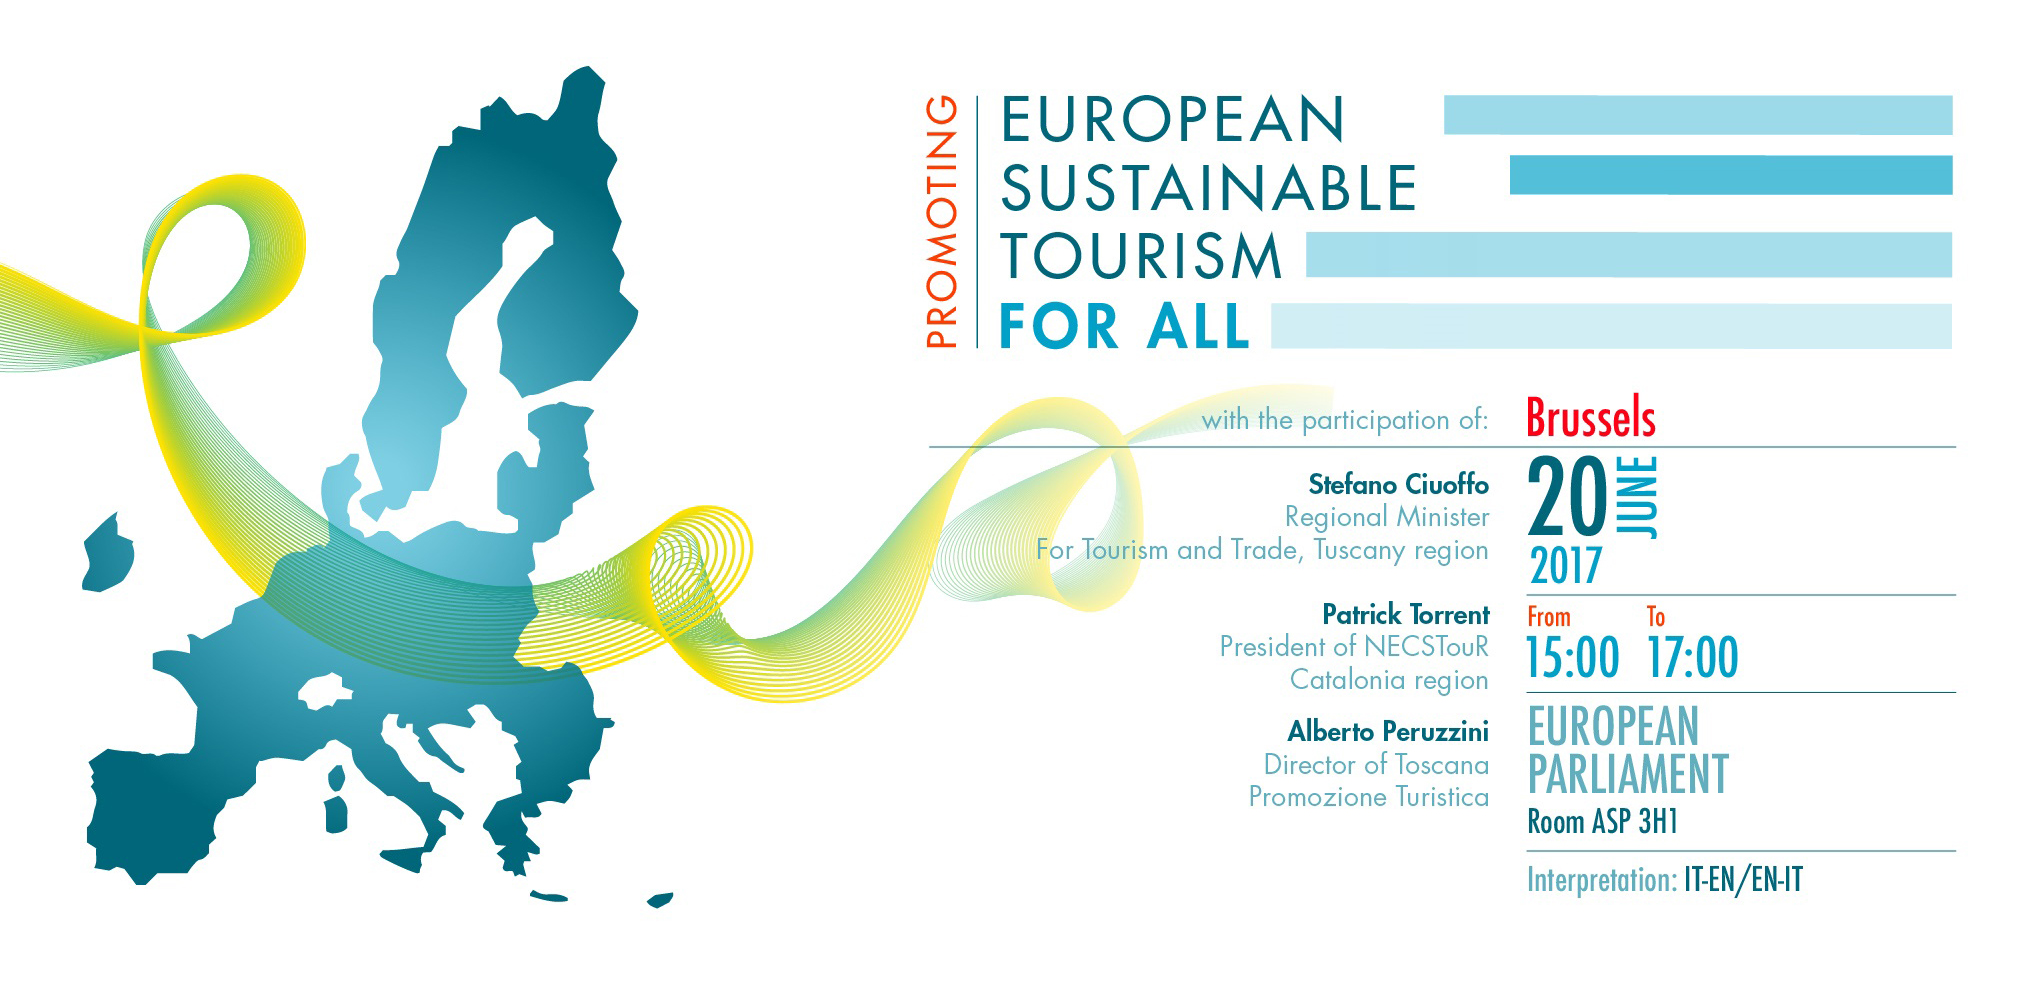 PROMOTING EUROPEAN SUSTAINABLE TOURISM FOR ALL